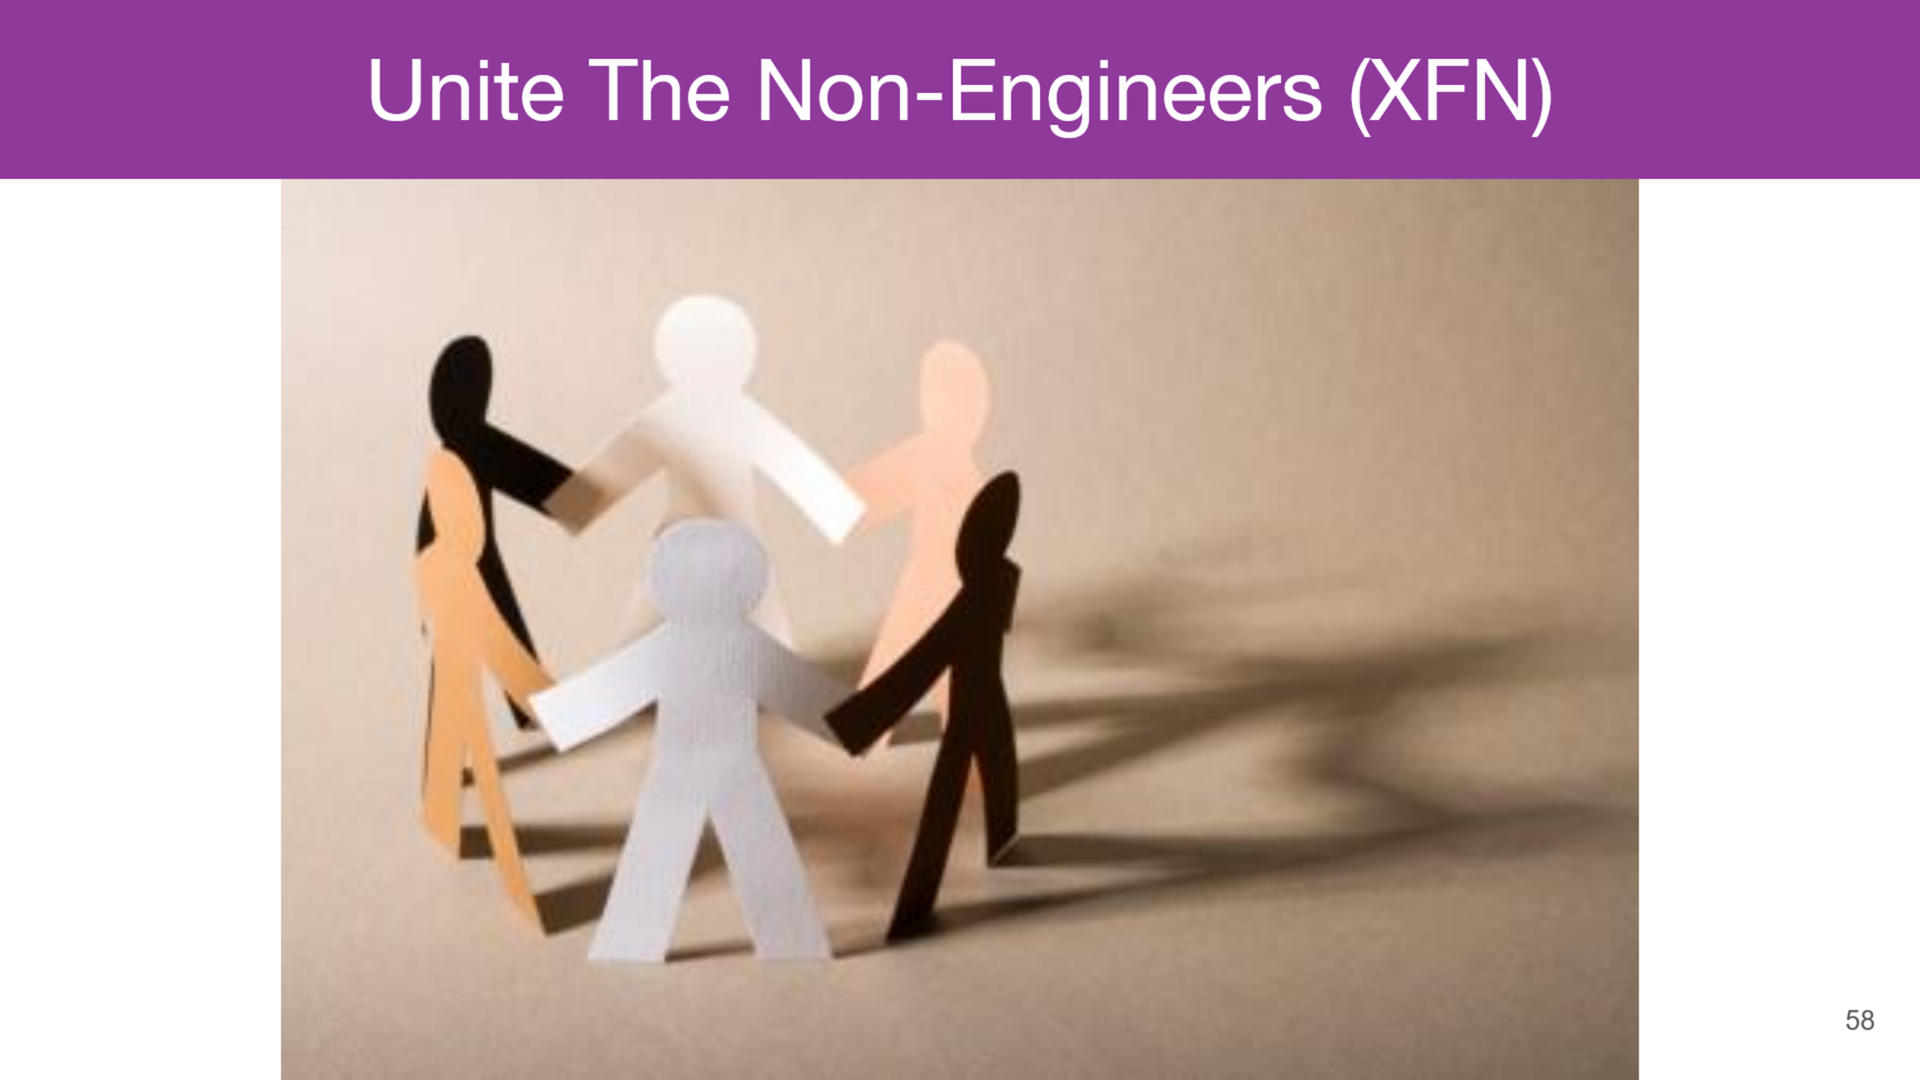 How To Be An Effective Tech Lead [Part 15] - Unite The Non-Engineers (XFN)